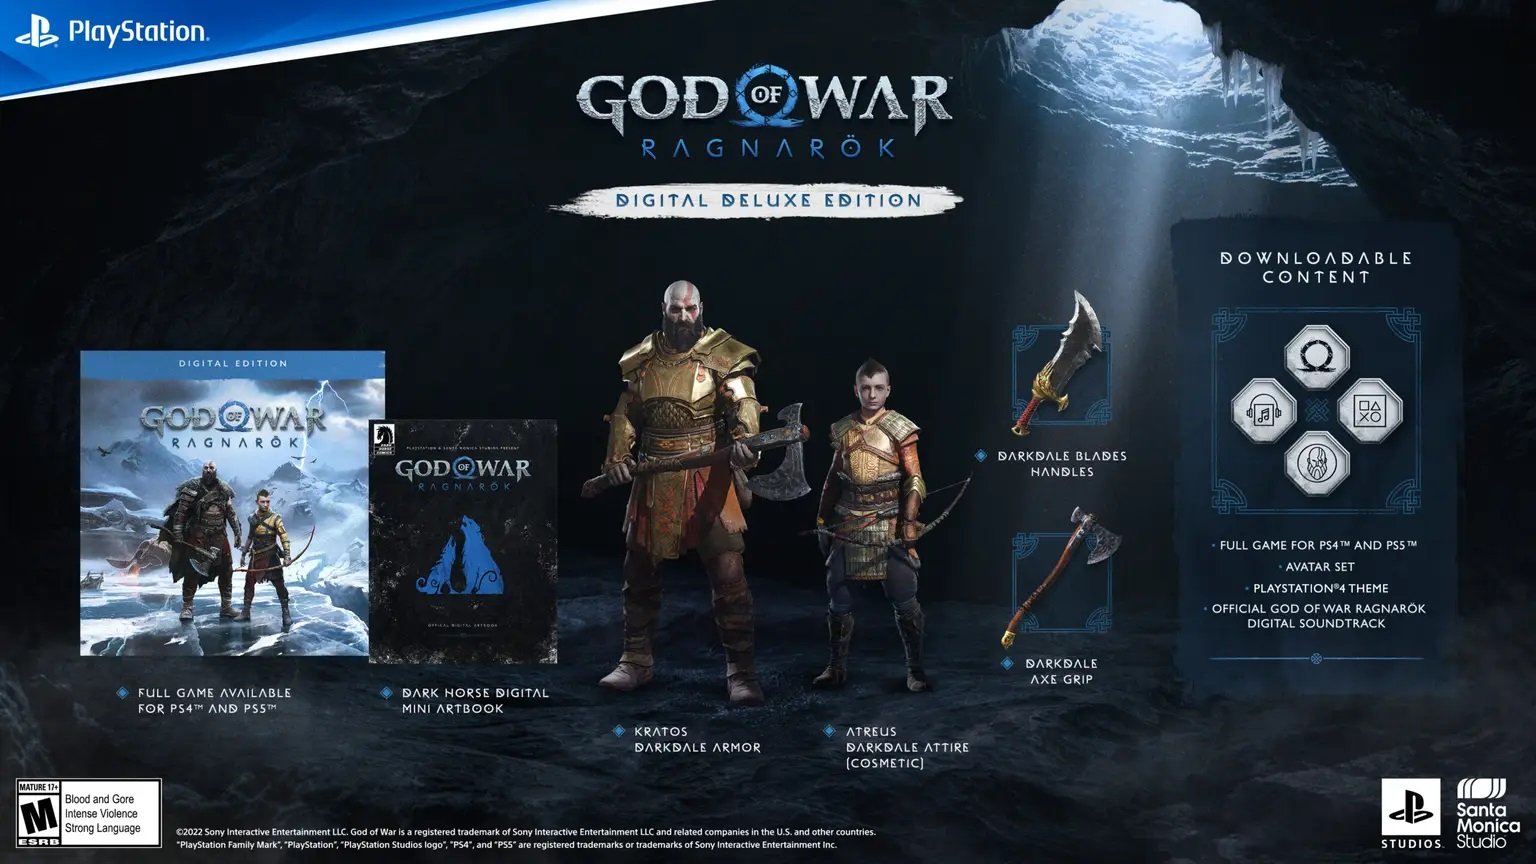 God Of War Ragnarok Graphics Modes For PS4 And PS5 Unveiled